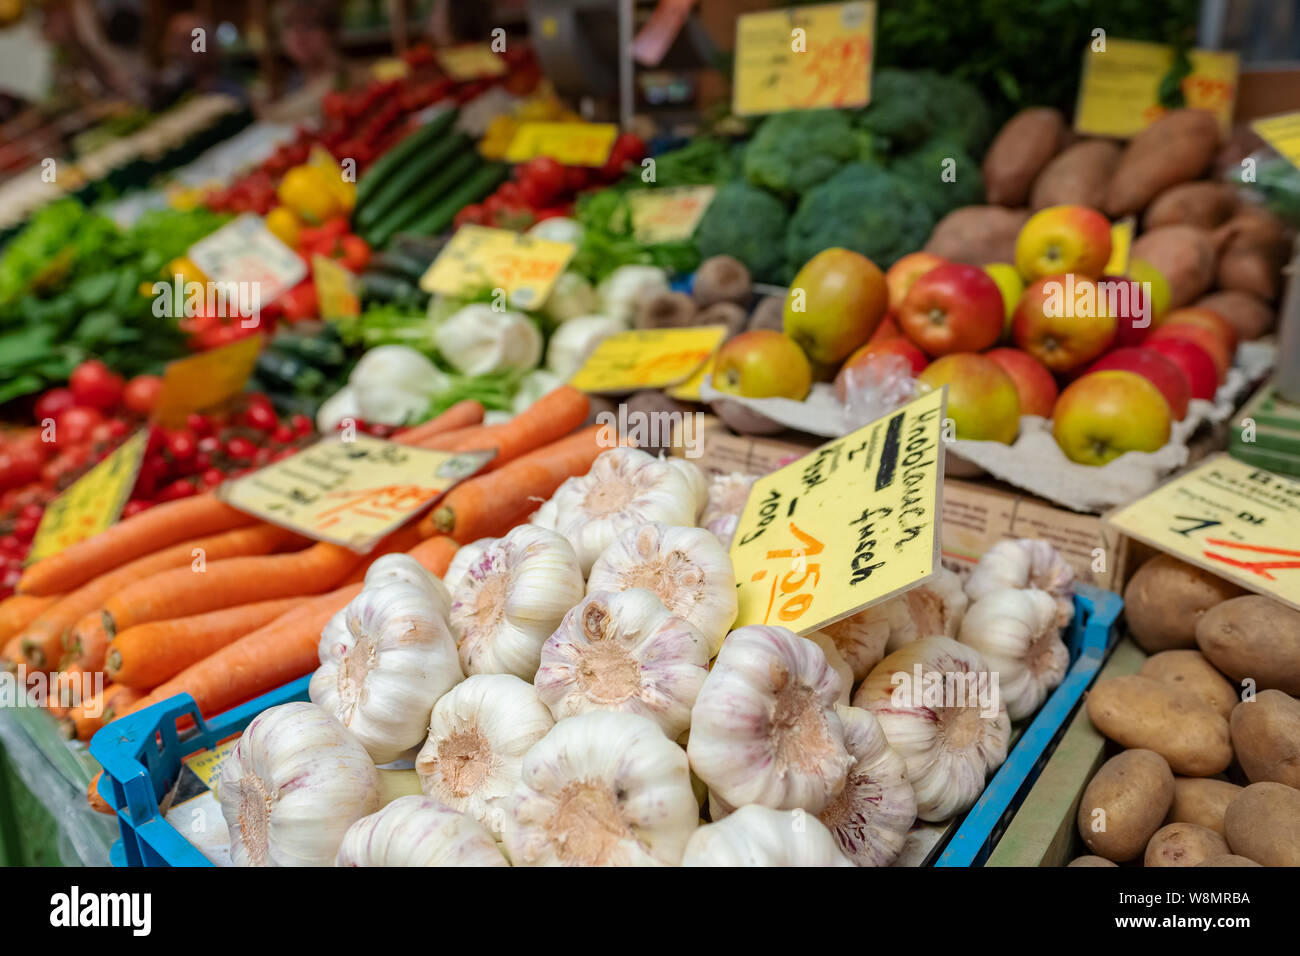 Big choice of fresh fruits and vegetables on a street market. Close-up photo of garlic with other vegetables at background Stock Photo